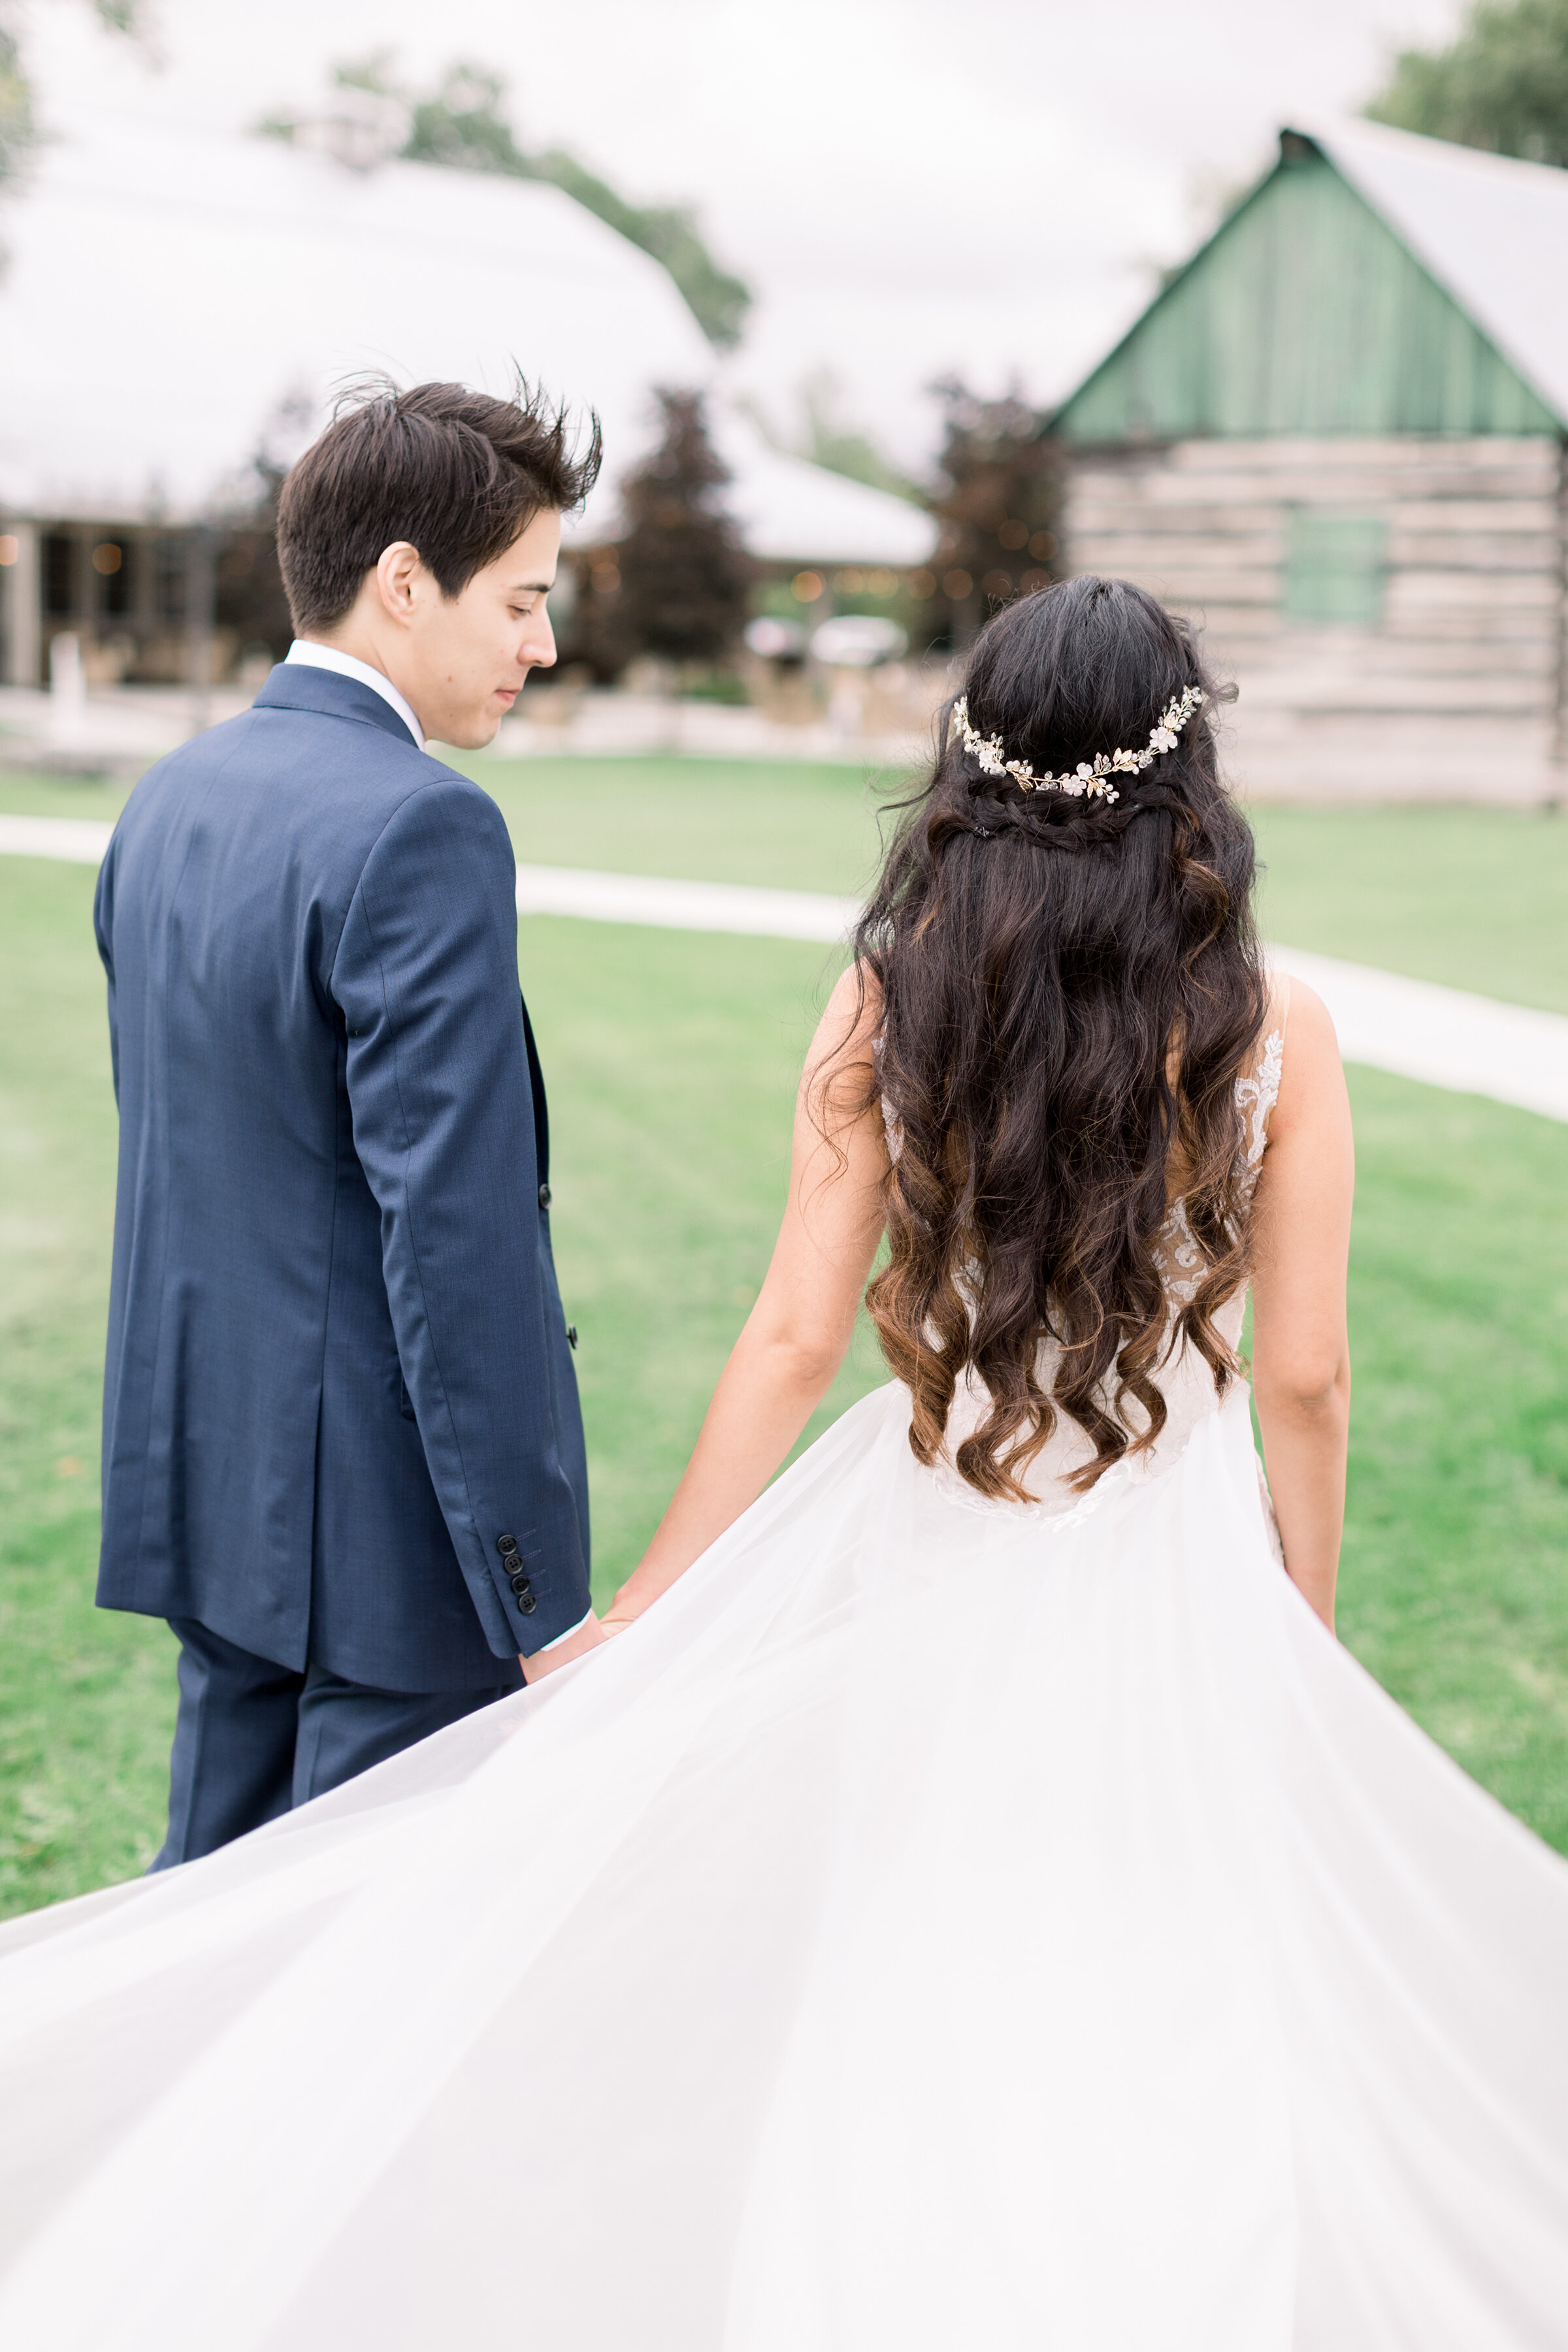  A beautiful bride and groom walk together as he checks her out in a romantic and beautiful wedding day photo shoot by professional Ottawa photographer Chelsea Mason Photography. Stonefields Estates Carleton Place wedding location inspiration rustic 